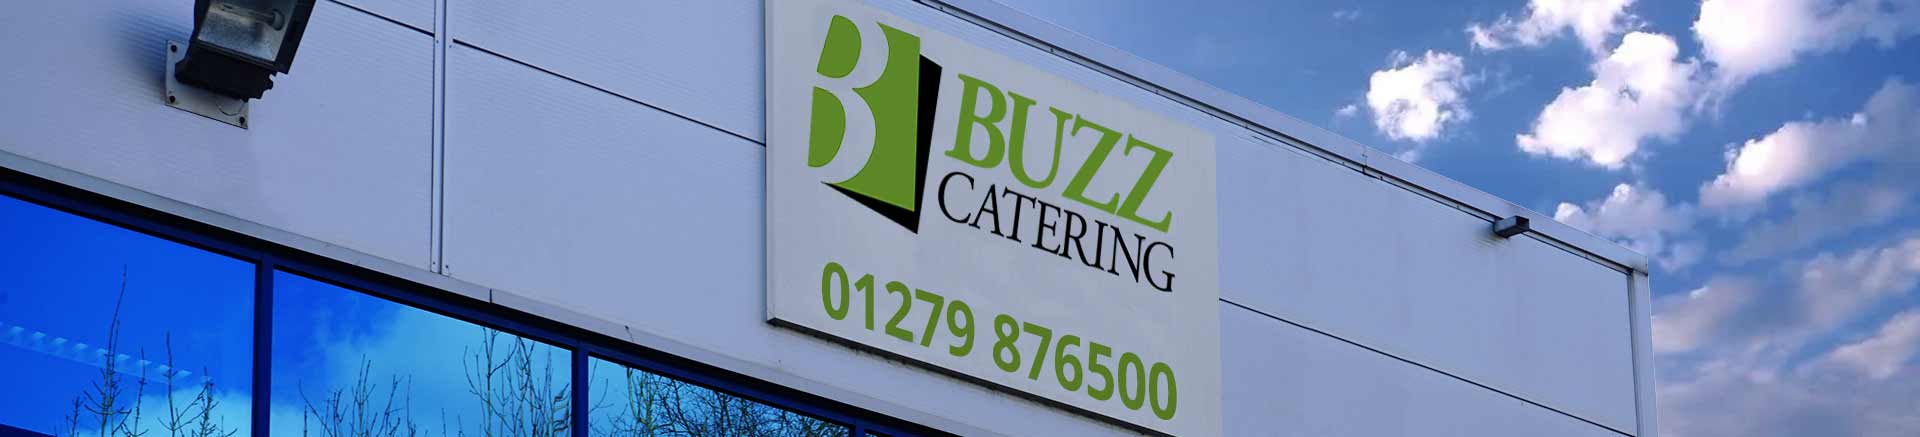 About Buzz Catering Supplies